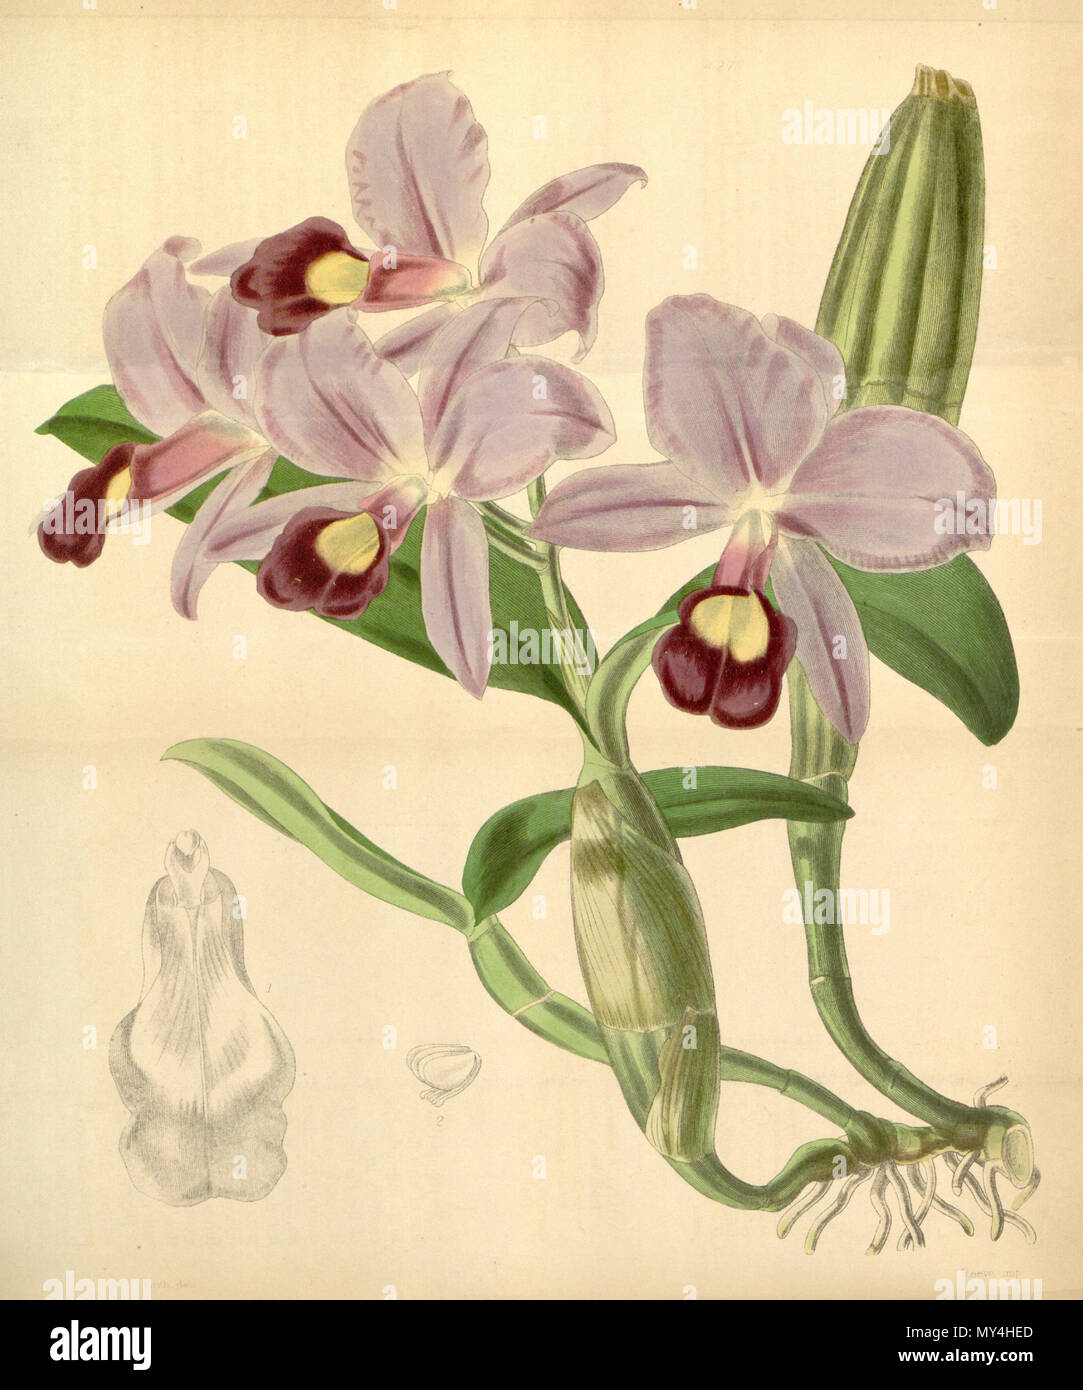 . Illustration of Guarianthe skinneri (as syn. Cattleya skinneri) . 1846. Walter Hood Fitch (1817-1892) del. 221 Guarianthe skinneri (as Cattleya skinneri) - Curtis' 72 (Ser. 3 no. 2) pl. 4270 (1846) Stock Photo